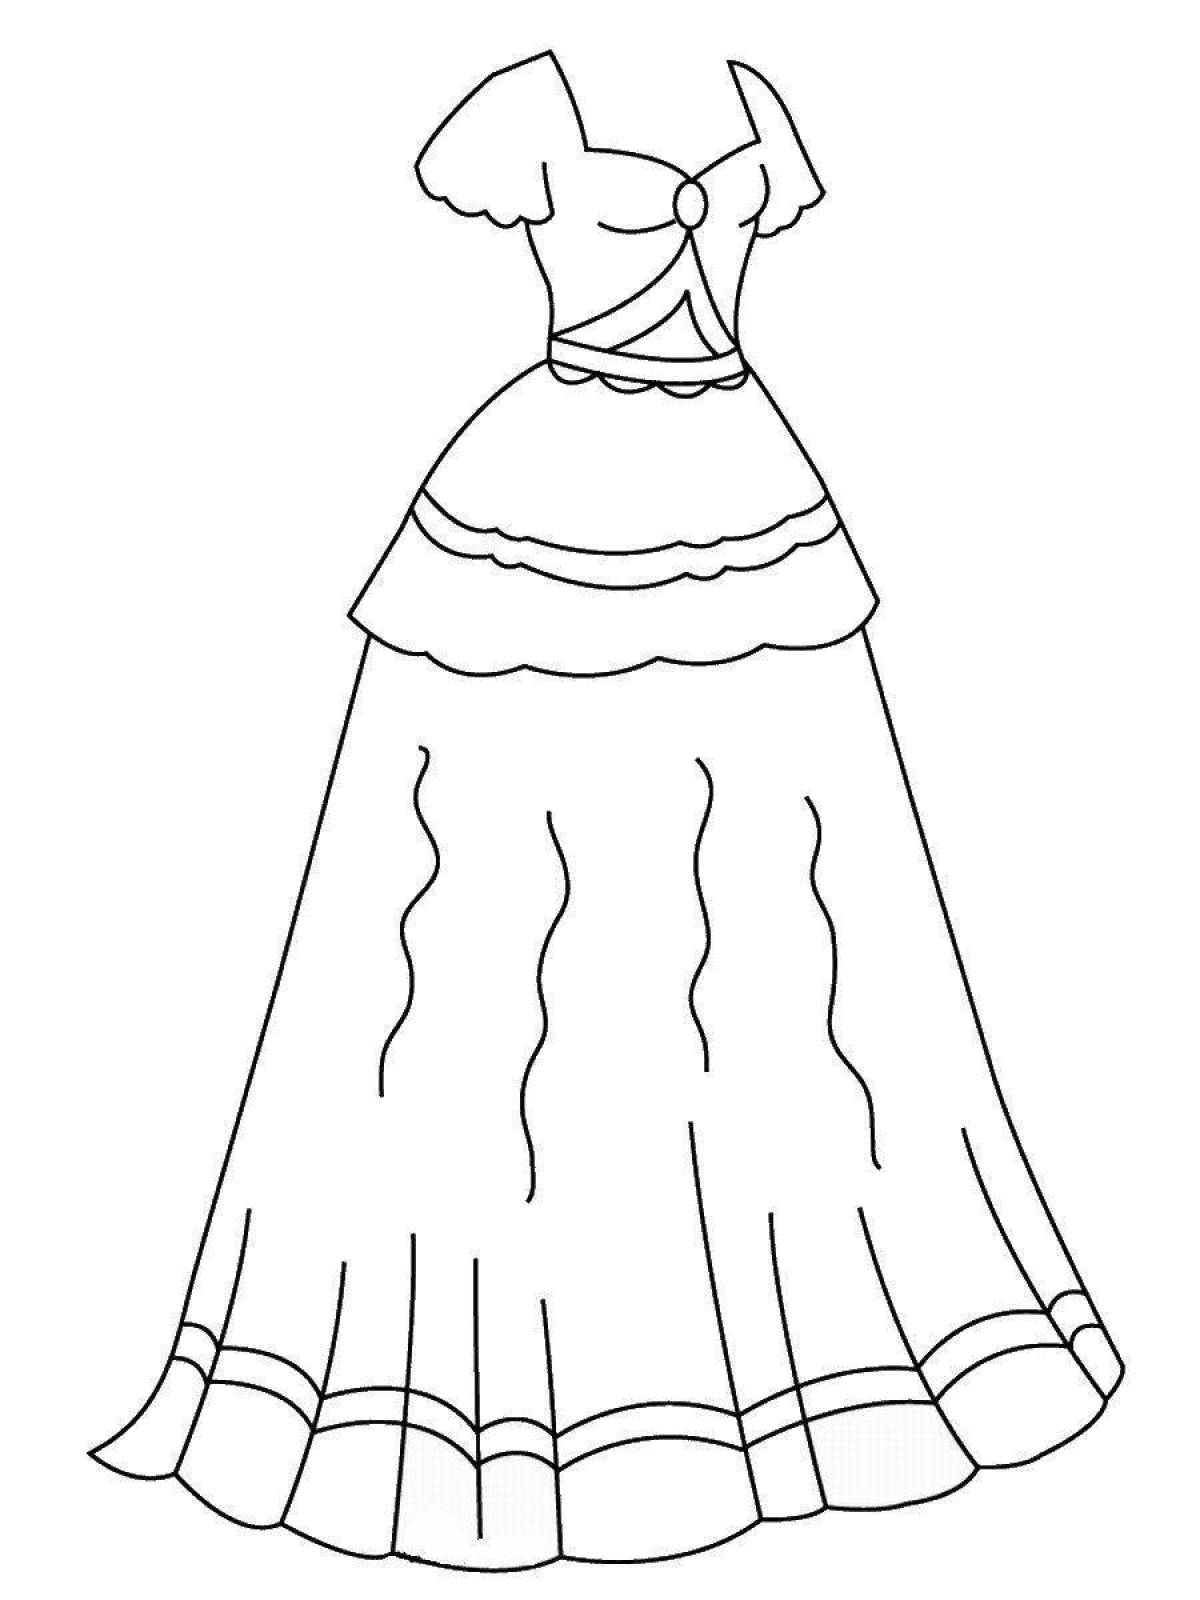 Coloring page adorable dress for kids